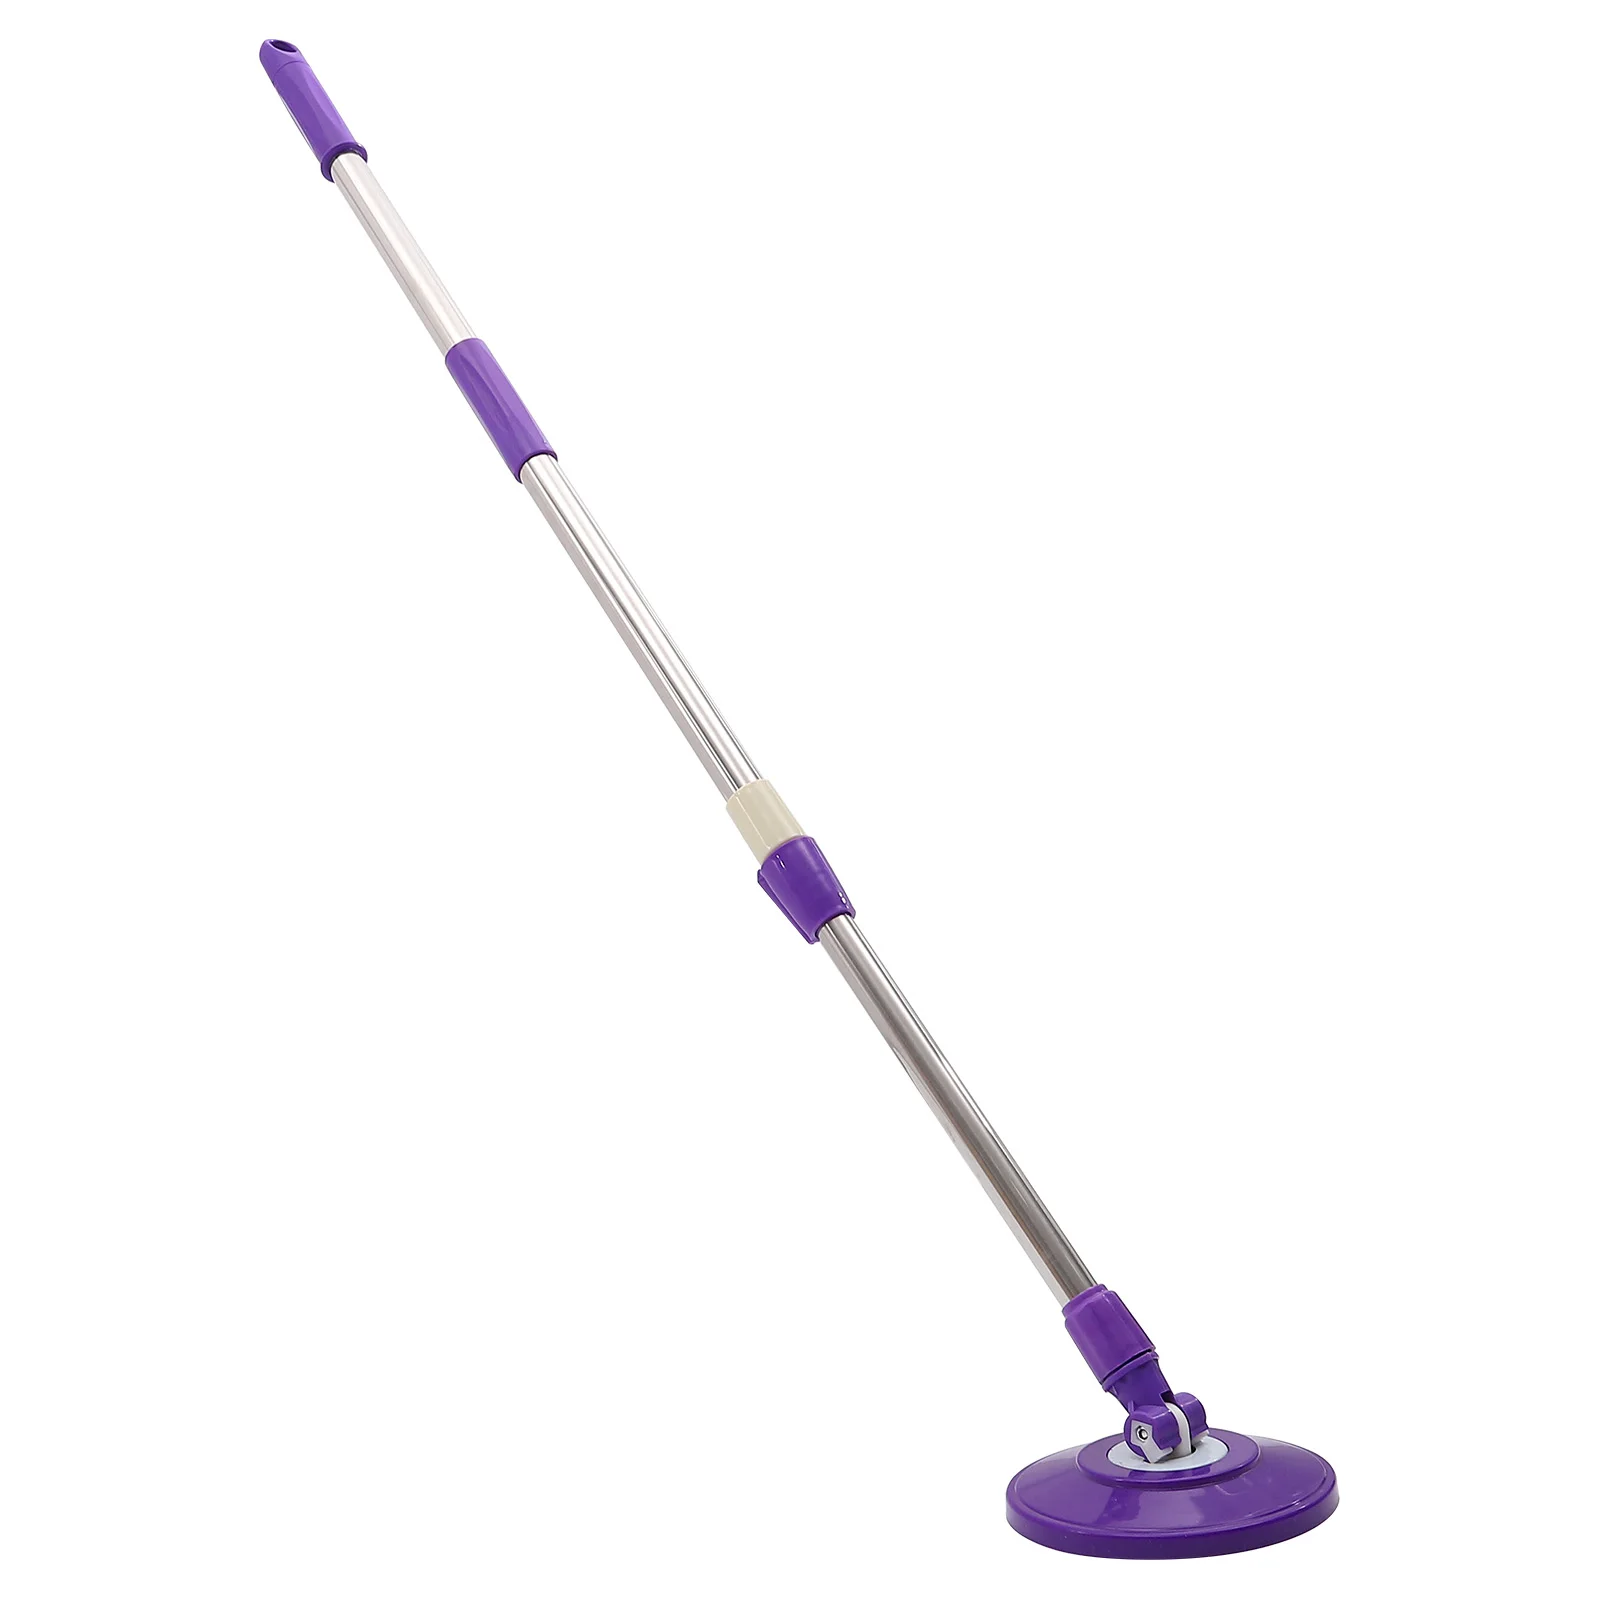 

Mop Replacement Pole Handle Rotating Accessories Replace Supplies Broom Tool Stick Floor Stainless Steel Cleaning Head Clean